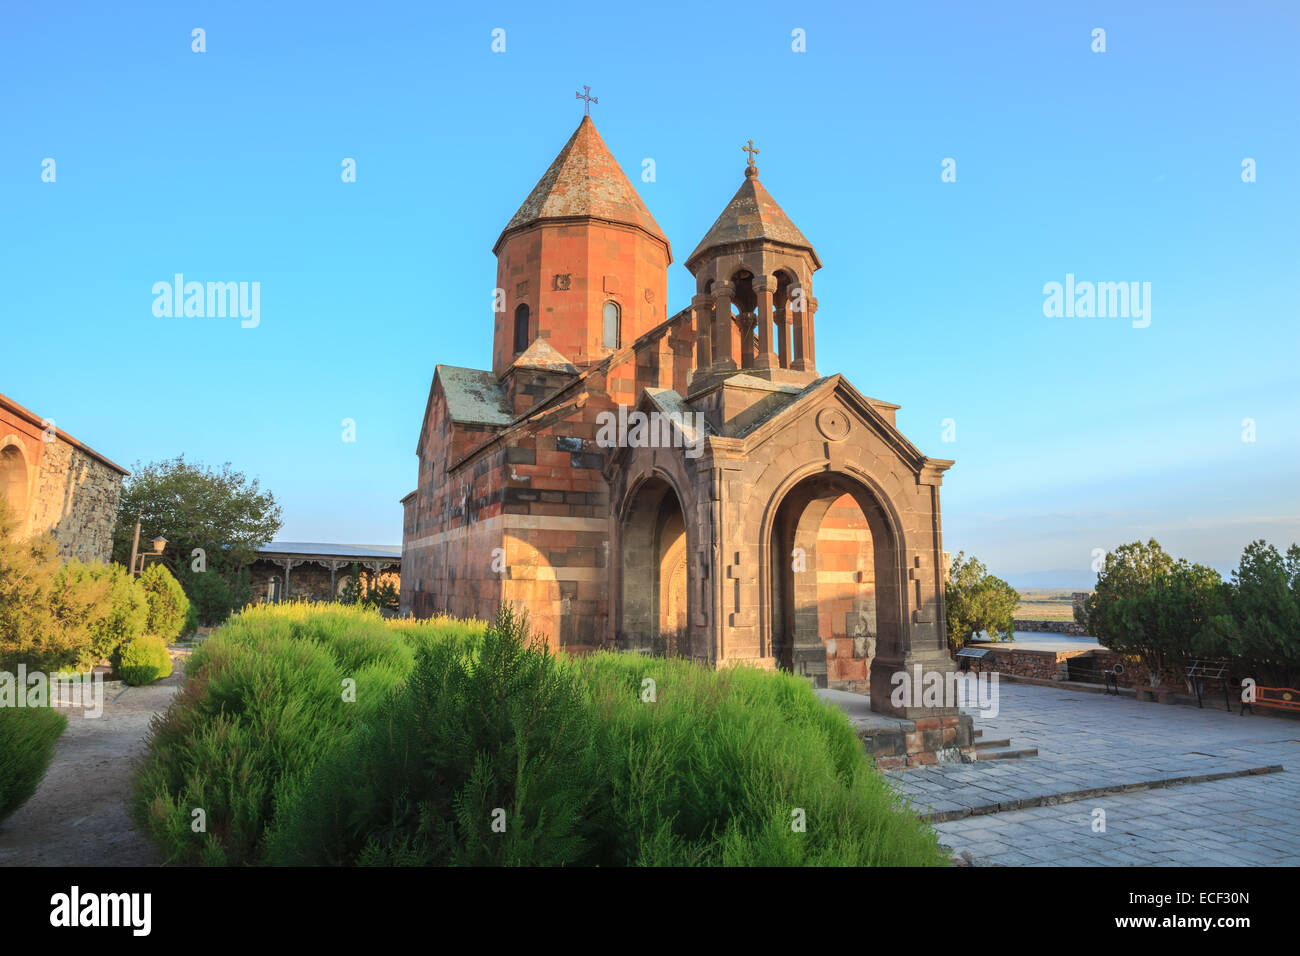 khor virap is ancient monastery located in the ararat valley in armenia Stock Photo